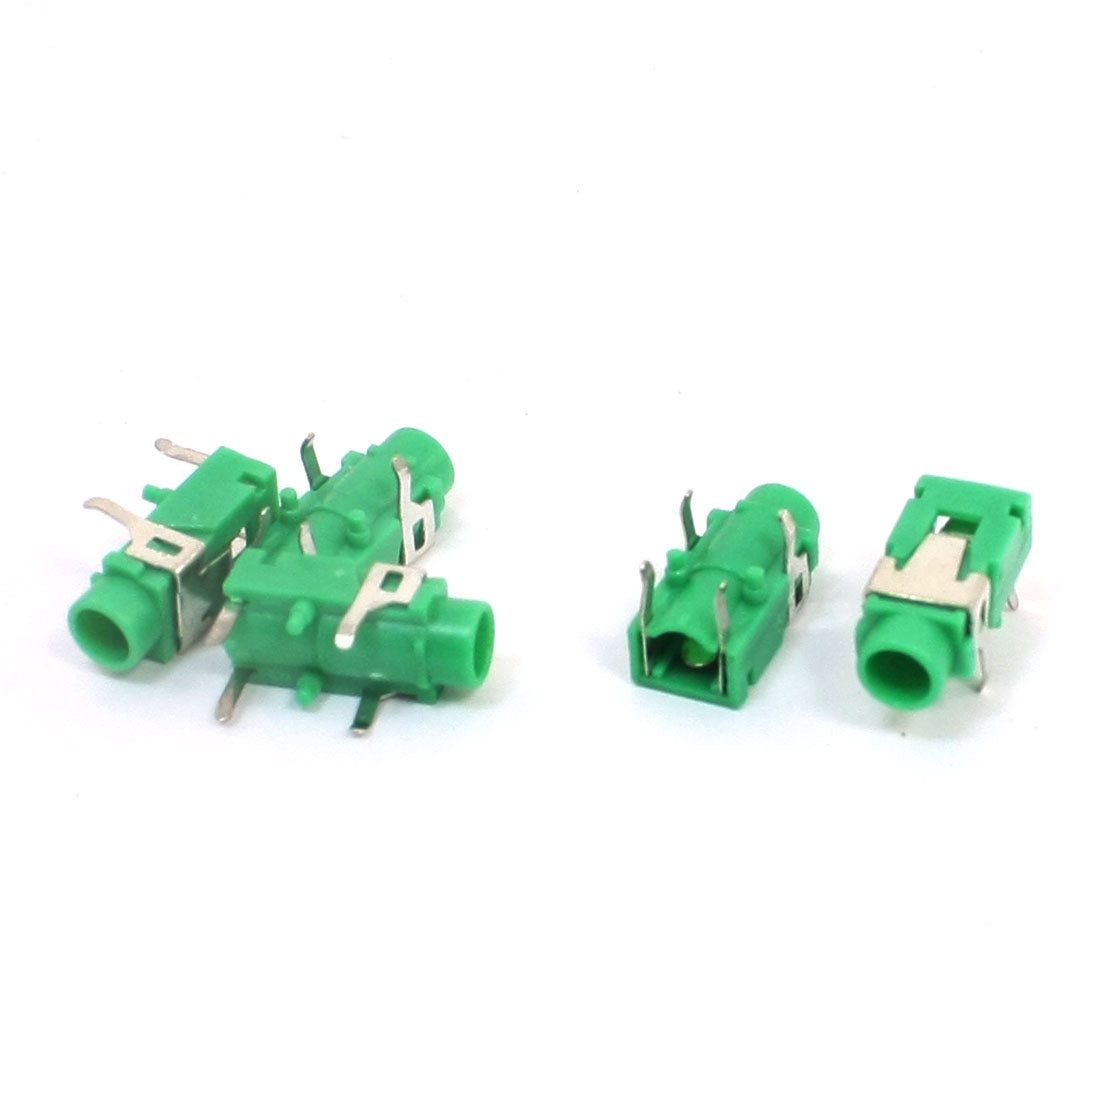 uxcell Uxcell DIP PCB Mount 4 Pins Female 3.5mm Stereo Audio Jack Socket Green 5 Pcs